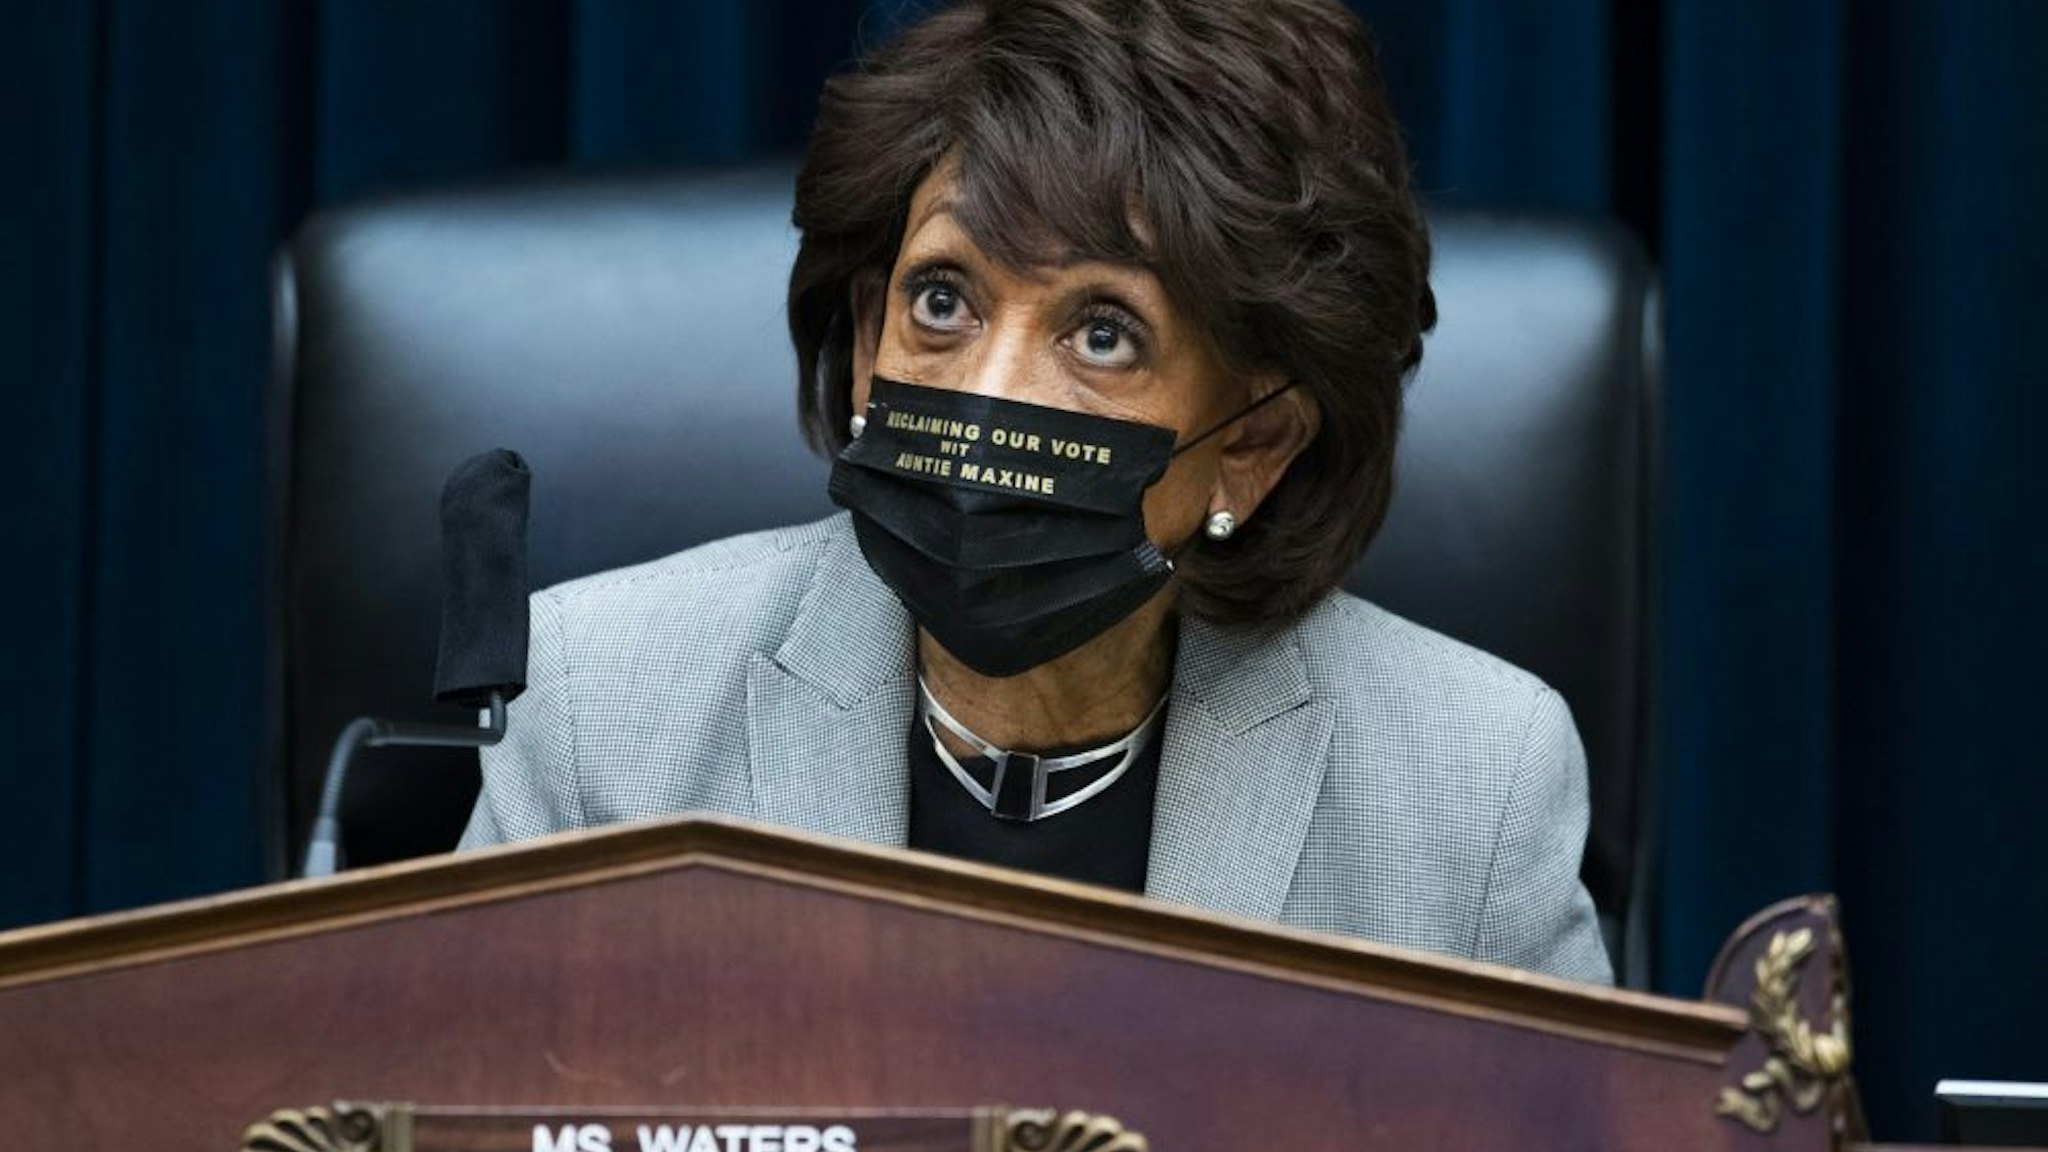 UNITED STATES - APRIL 20: Chairwoman Maxine Waters, D-Calif., arrives for a House Financial Services Committee markup in Rayburn Building on Tuesday, April 20, 2021.